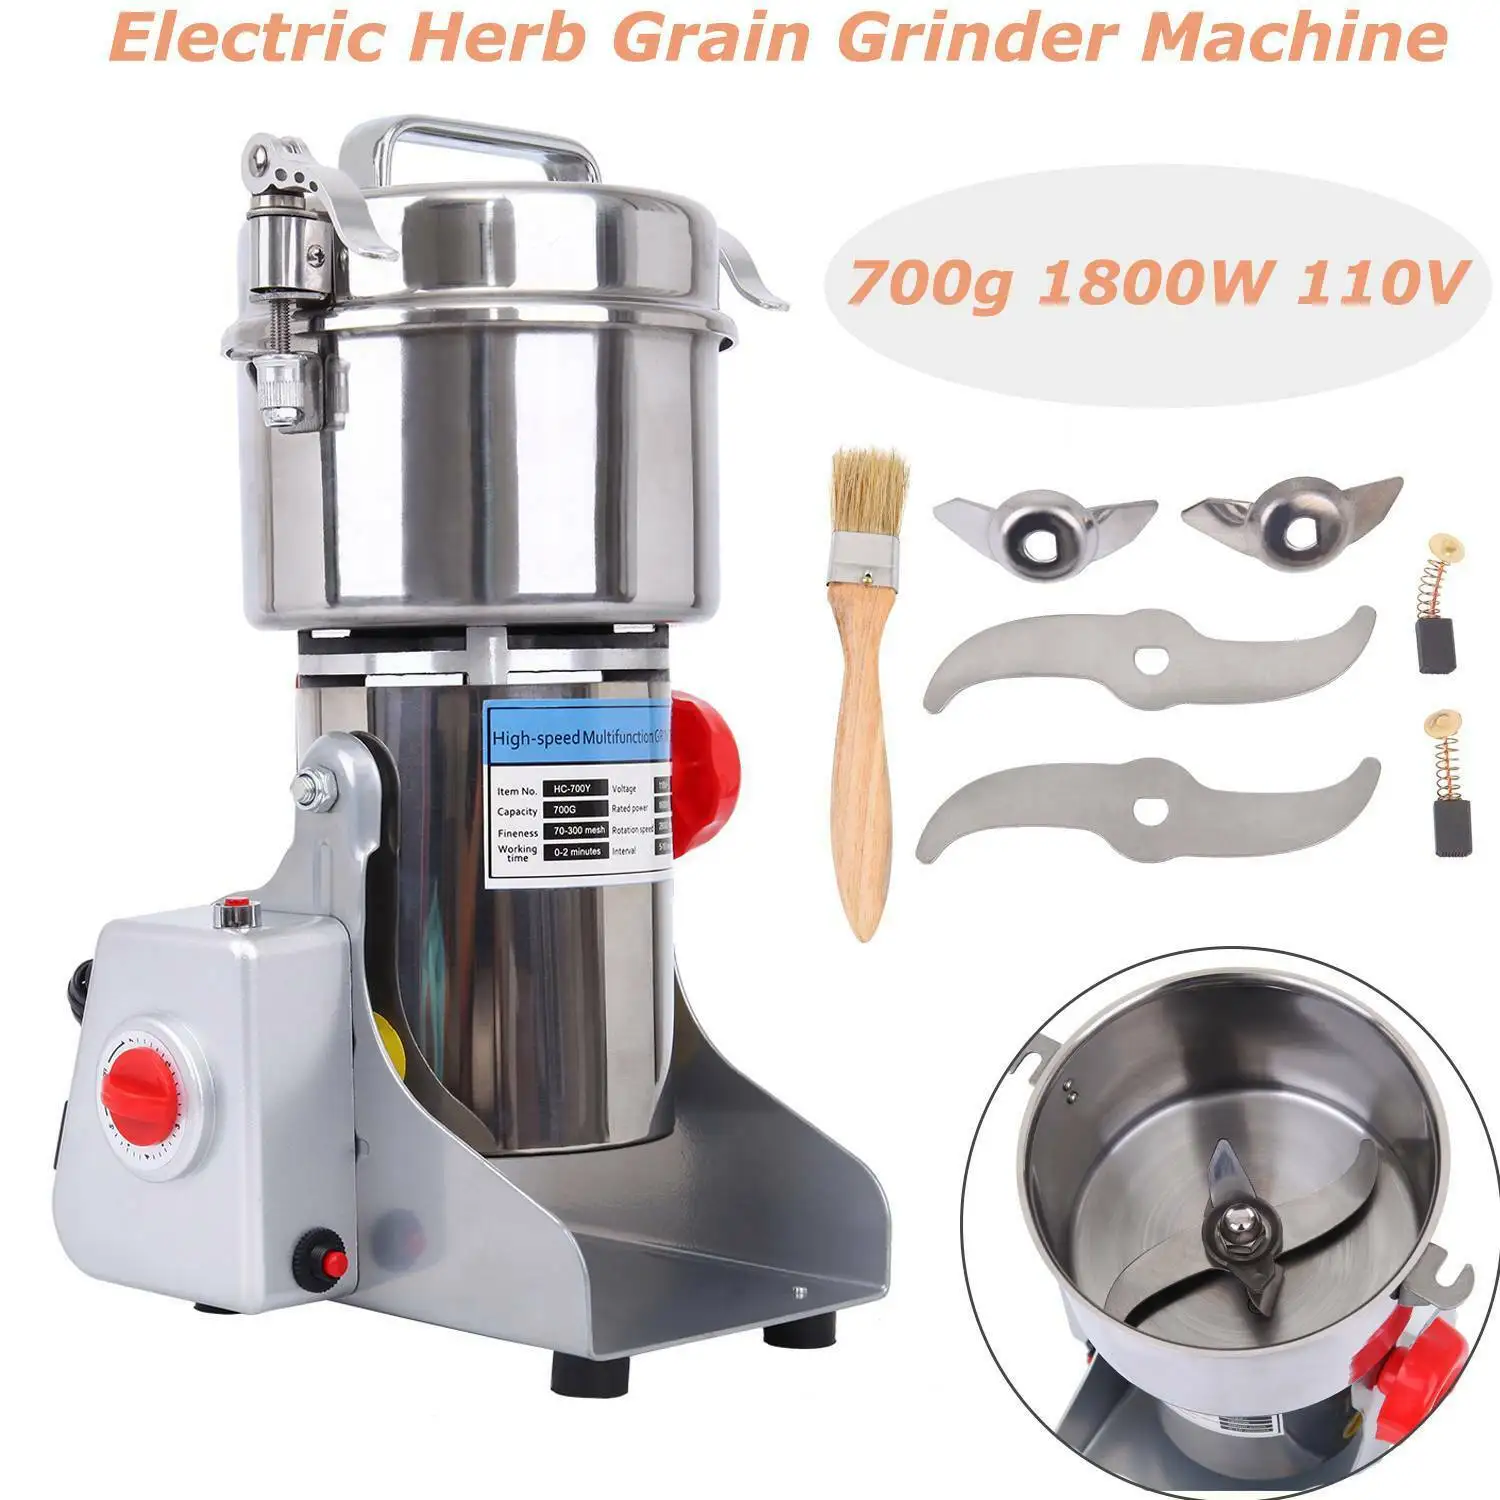 

Honhill 700g Electric Grain Grinder Mill Poder Machine Coffee Grinder Kitchen Cereals Nuts Beans Spices Grains Grinding Crusher